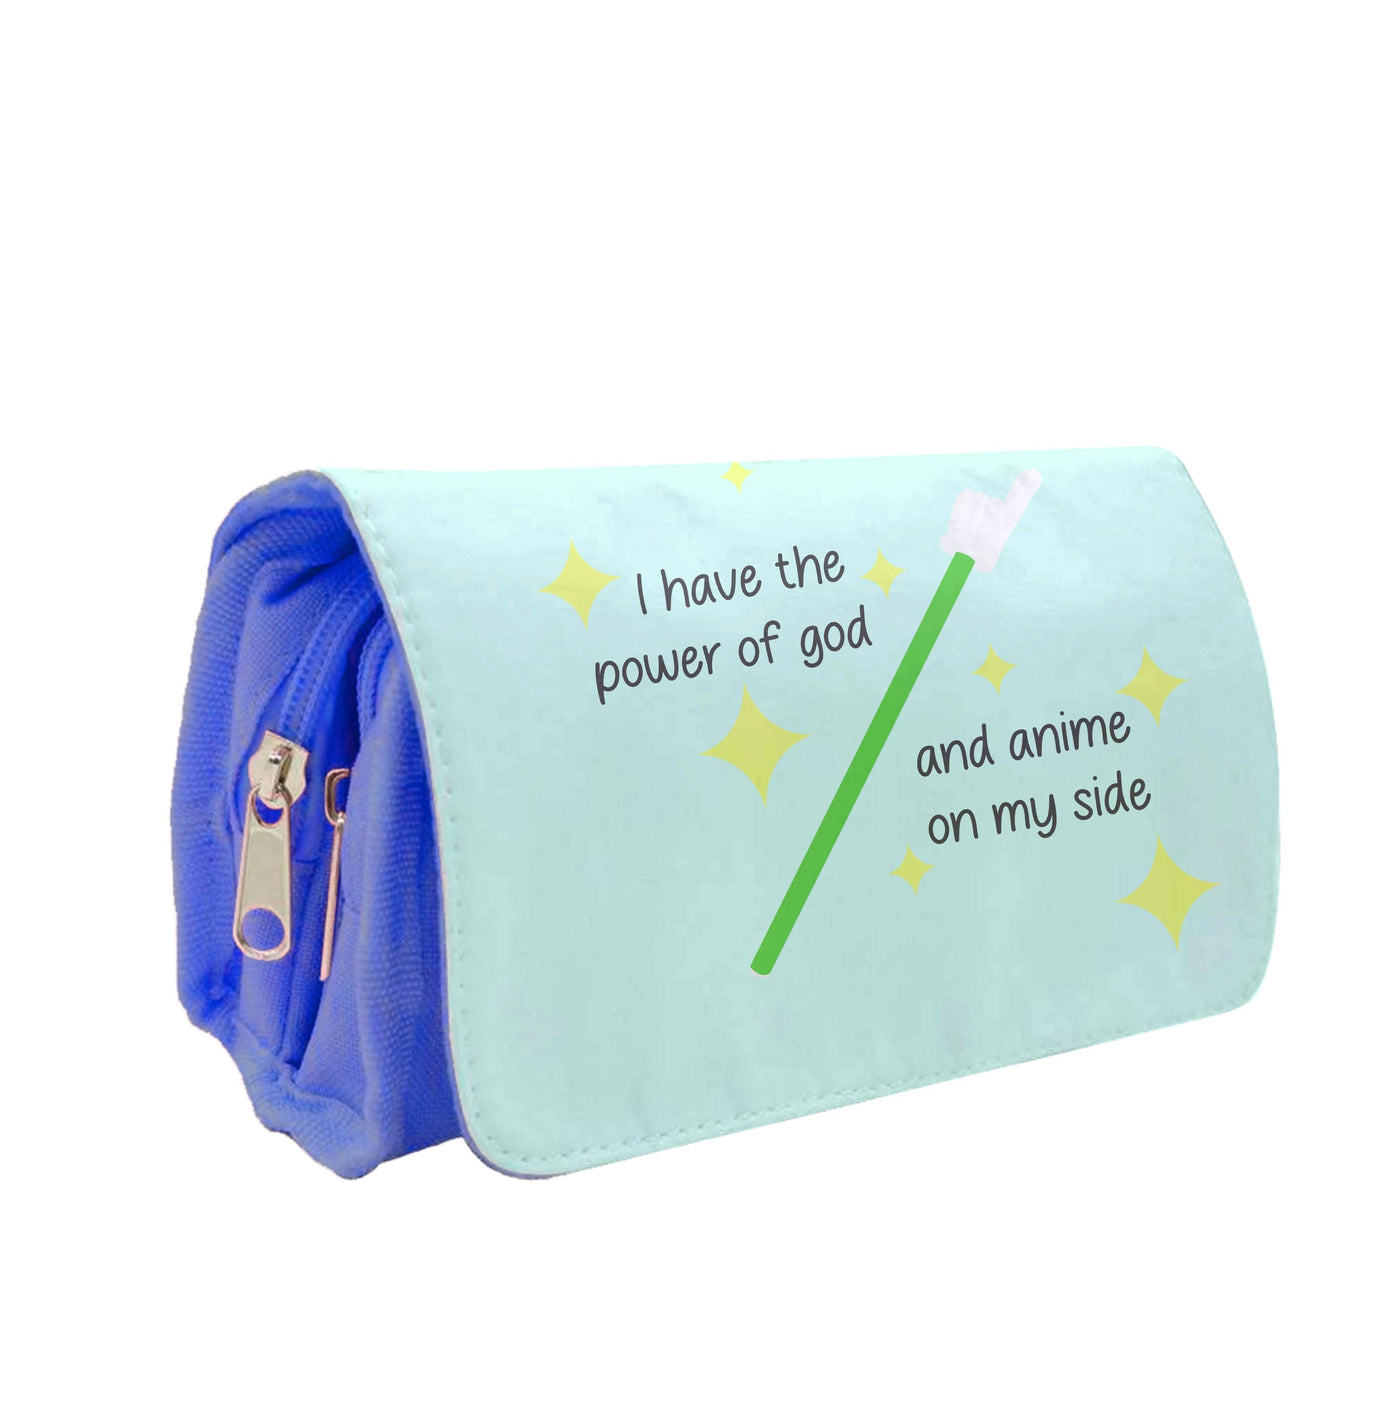 I Have The Power Of God And Anime On My Side - Memes Pencil Case